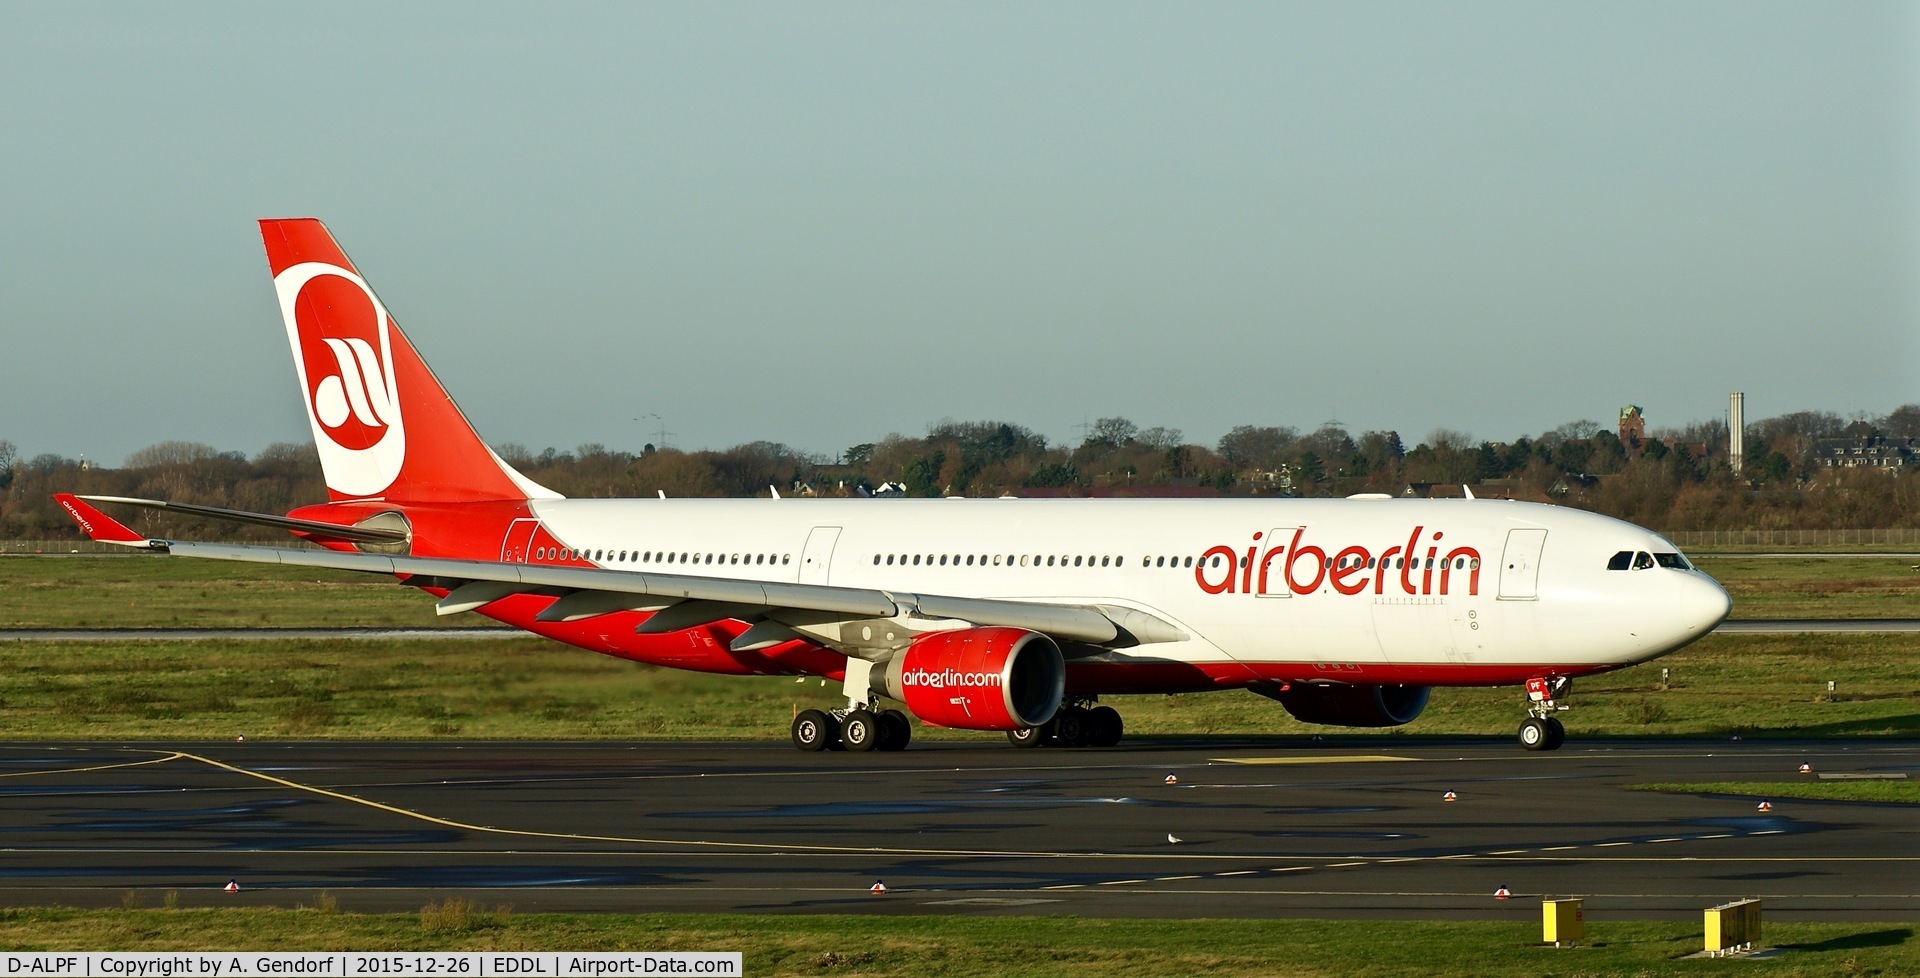 D-ALPF, 2002 Airbus A330-223 C/N 476, Air Berlin, is here on taxiway 